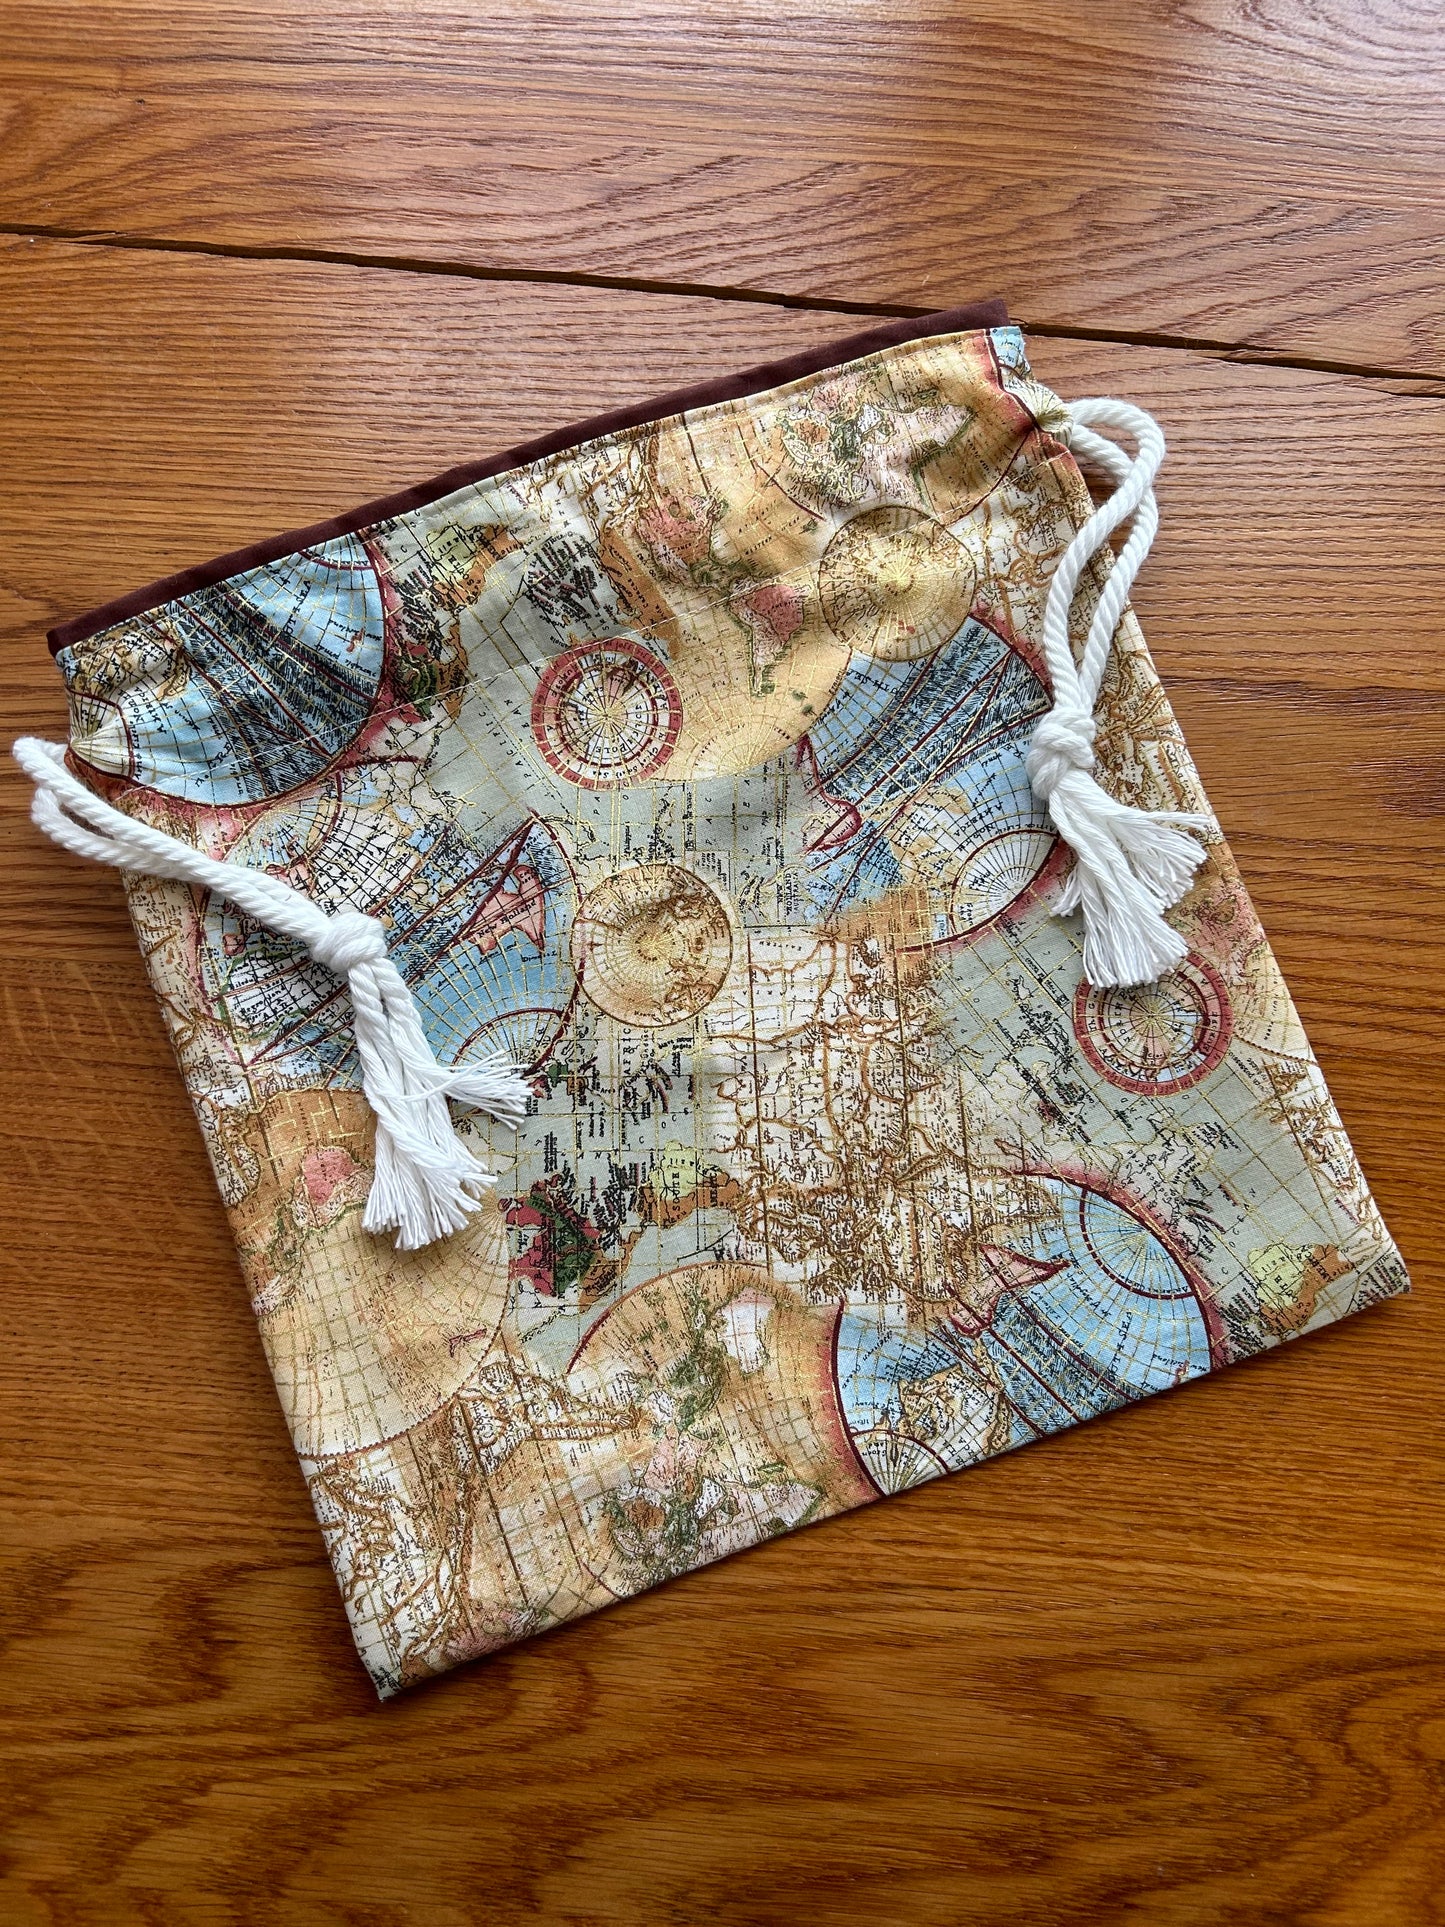 Wren & Purl's Perfectly Imperfect Project Bags